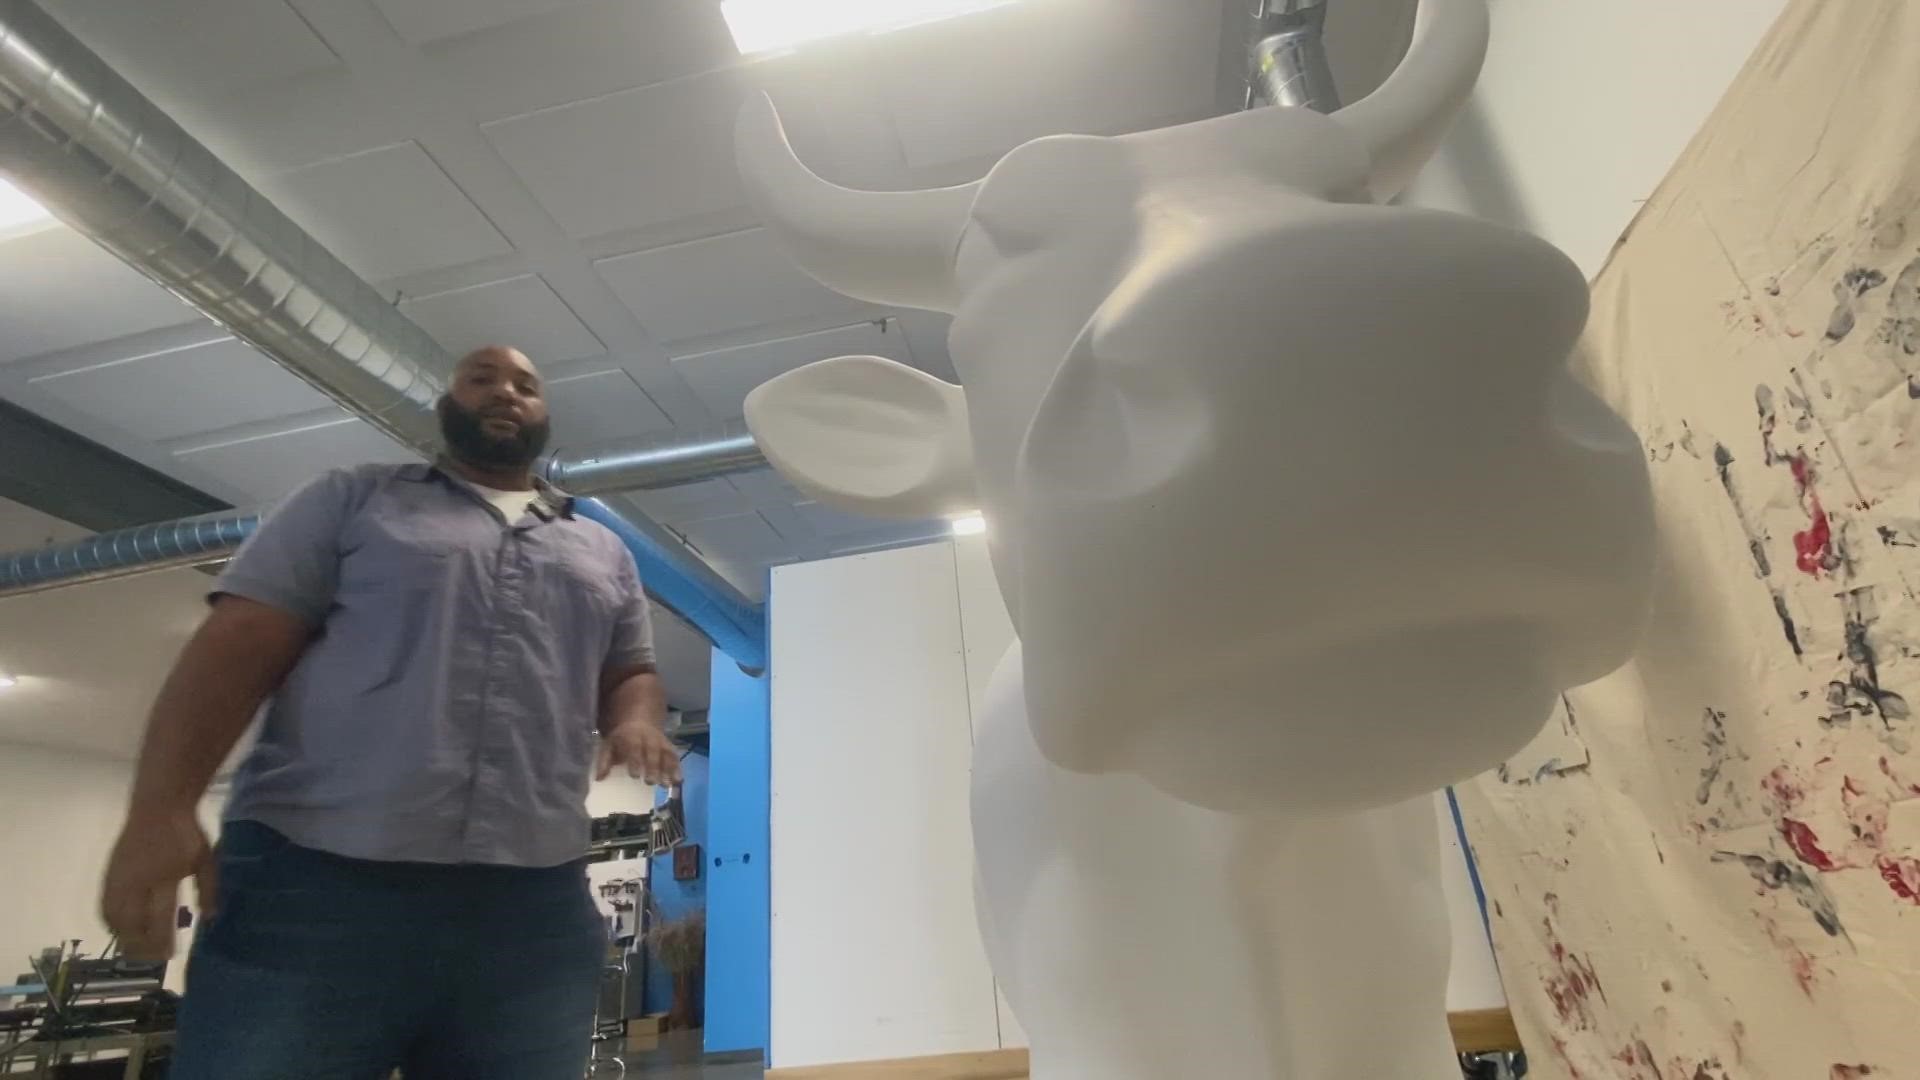 Eamon White is one of 75 artists chosen in New England to paint a cow dedicated to two group efforts to fight cancer. His will be displayed outside Fenway Park.